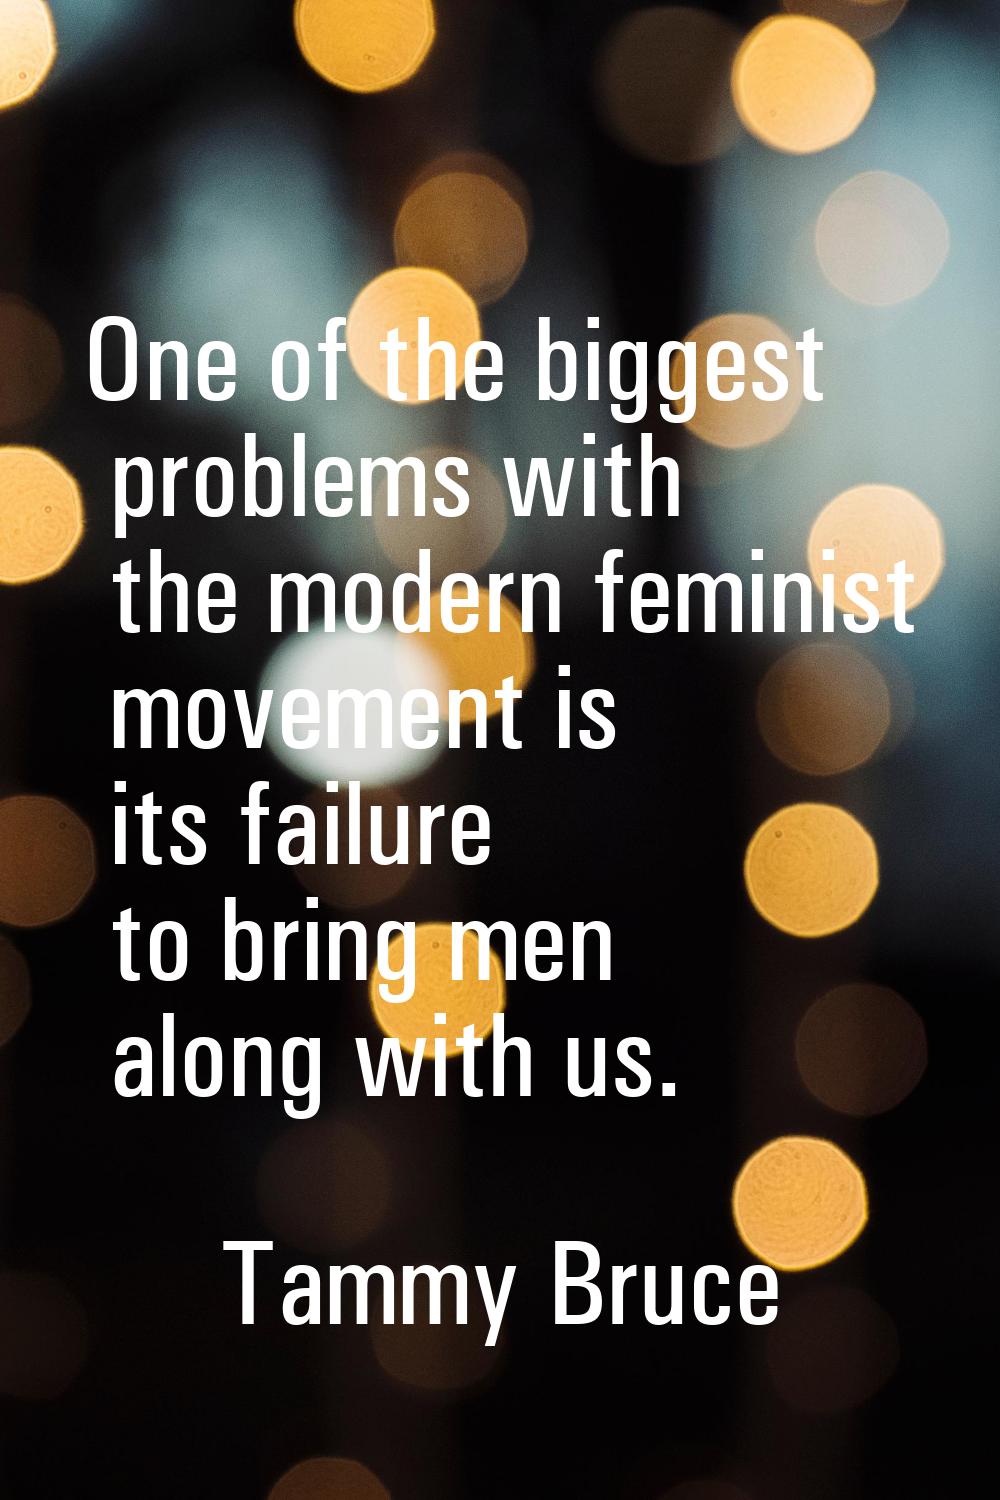 One of the biggest problems with the modern feminist movement is its failure to bring men along wit